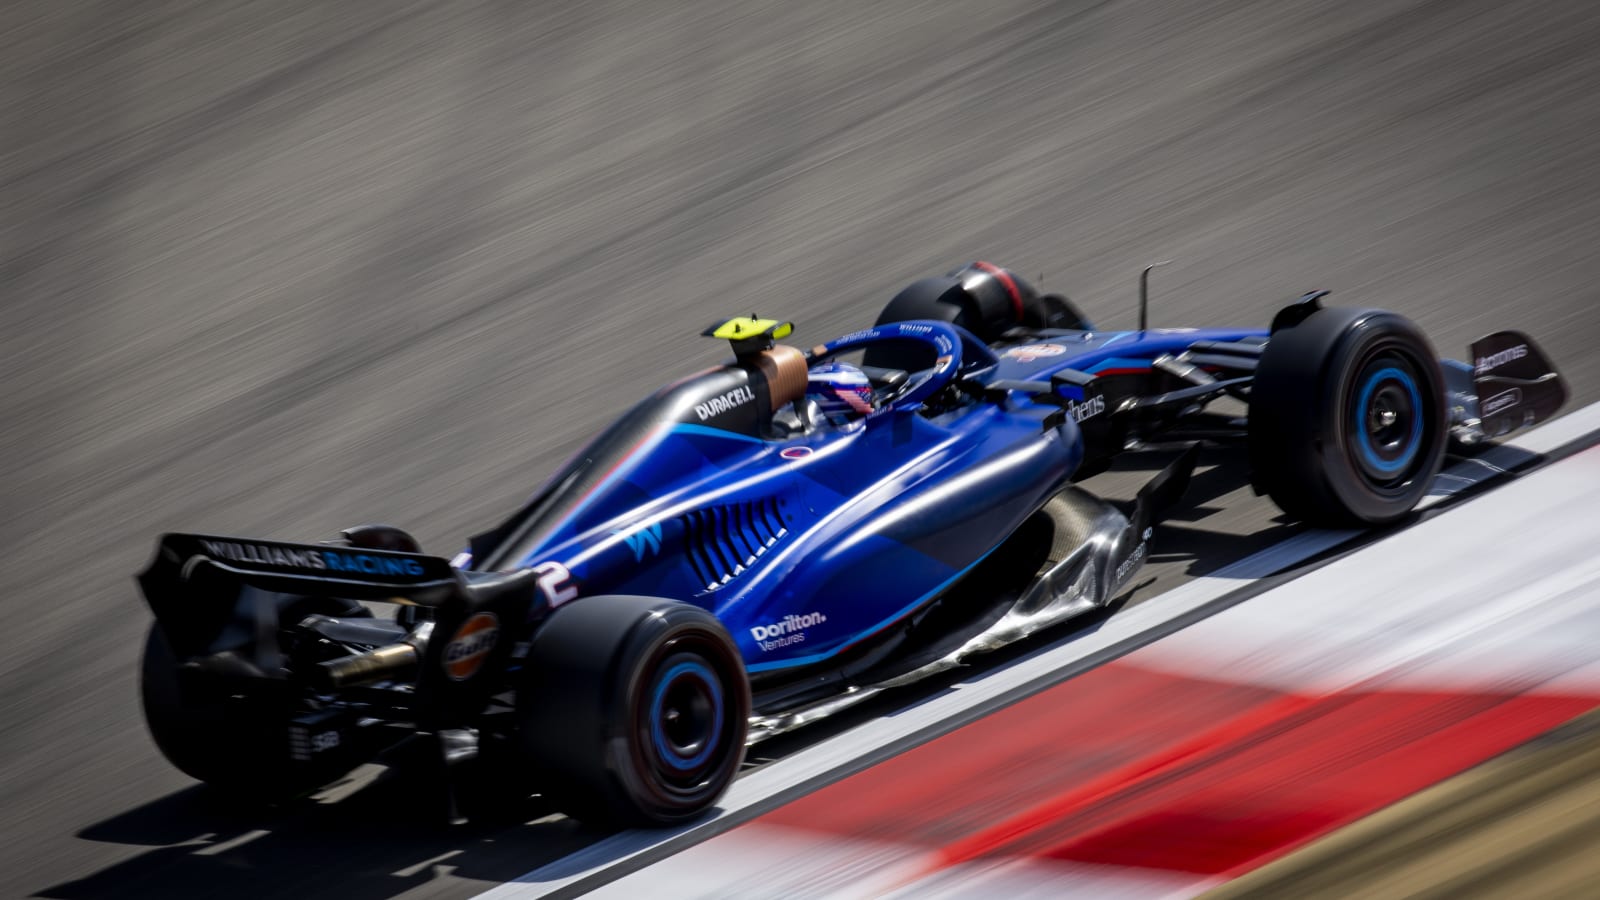 BAHRAIN - Logan Sargeant (Williams) during the second day of testing at the Bahrain International Circuit ahead of the start of the Formula 1 season. ANP SEM VAN DER WAL (Photo by ANP via Getty Images)